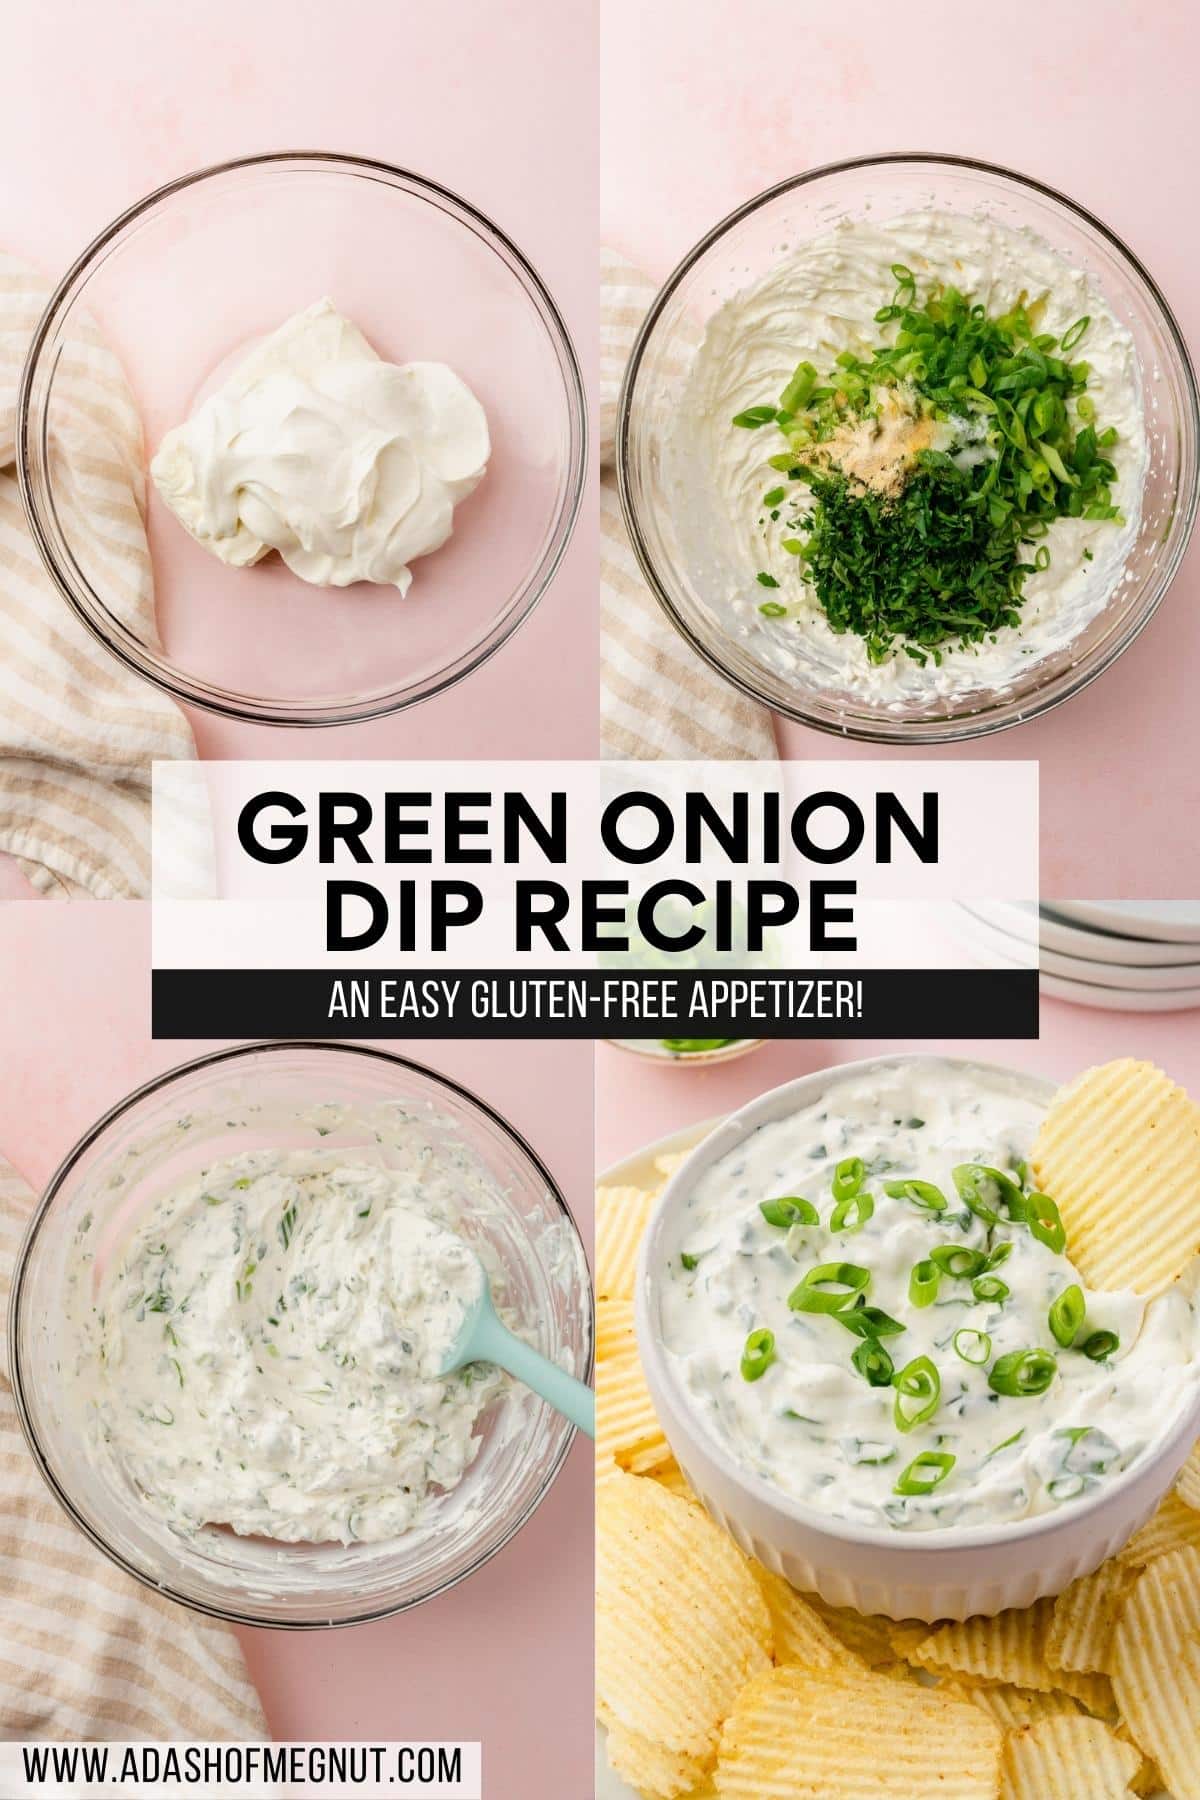 A four photo collage showing the process of making green onion dip. Photo 1: A glass mixing bowl with a brick of cream cheese and sour cream before mixing. Photo 2: Cream cheese and sour cream mixture in a bowl topped with sliced green onions, fresh parsley, salt, garlic powder, and onion powder. Photo 3: A green onion sour cream dip mixture in a glass mixing bowl. Photo 4: A bowl of sour cream green onion dip on a plate of chips with a single chip dipped into the green onion dip.